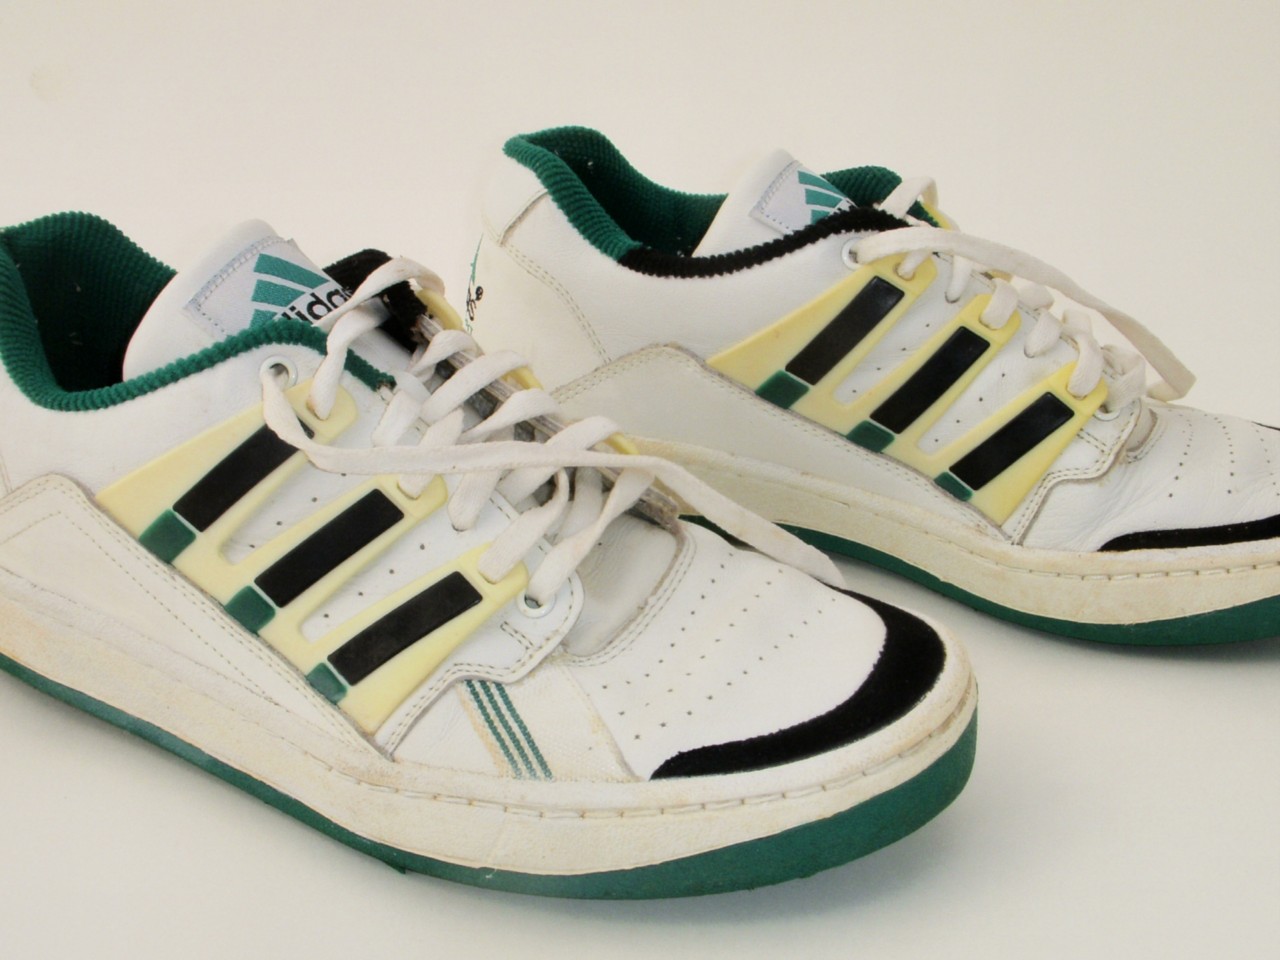 Vintage Adidas Equipment Retro Shoes Made in France EUC Men's Size 9 | eBay